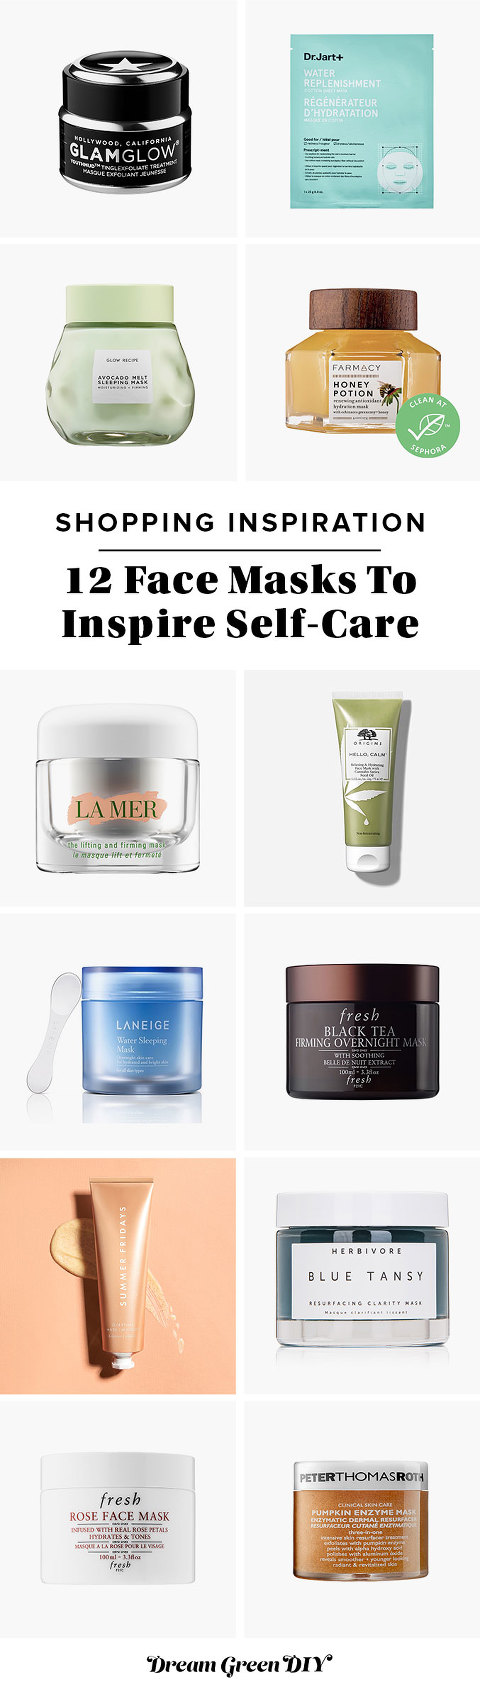 12 Face Masks To Inspire Self-Care